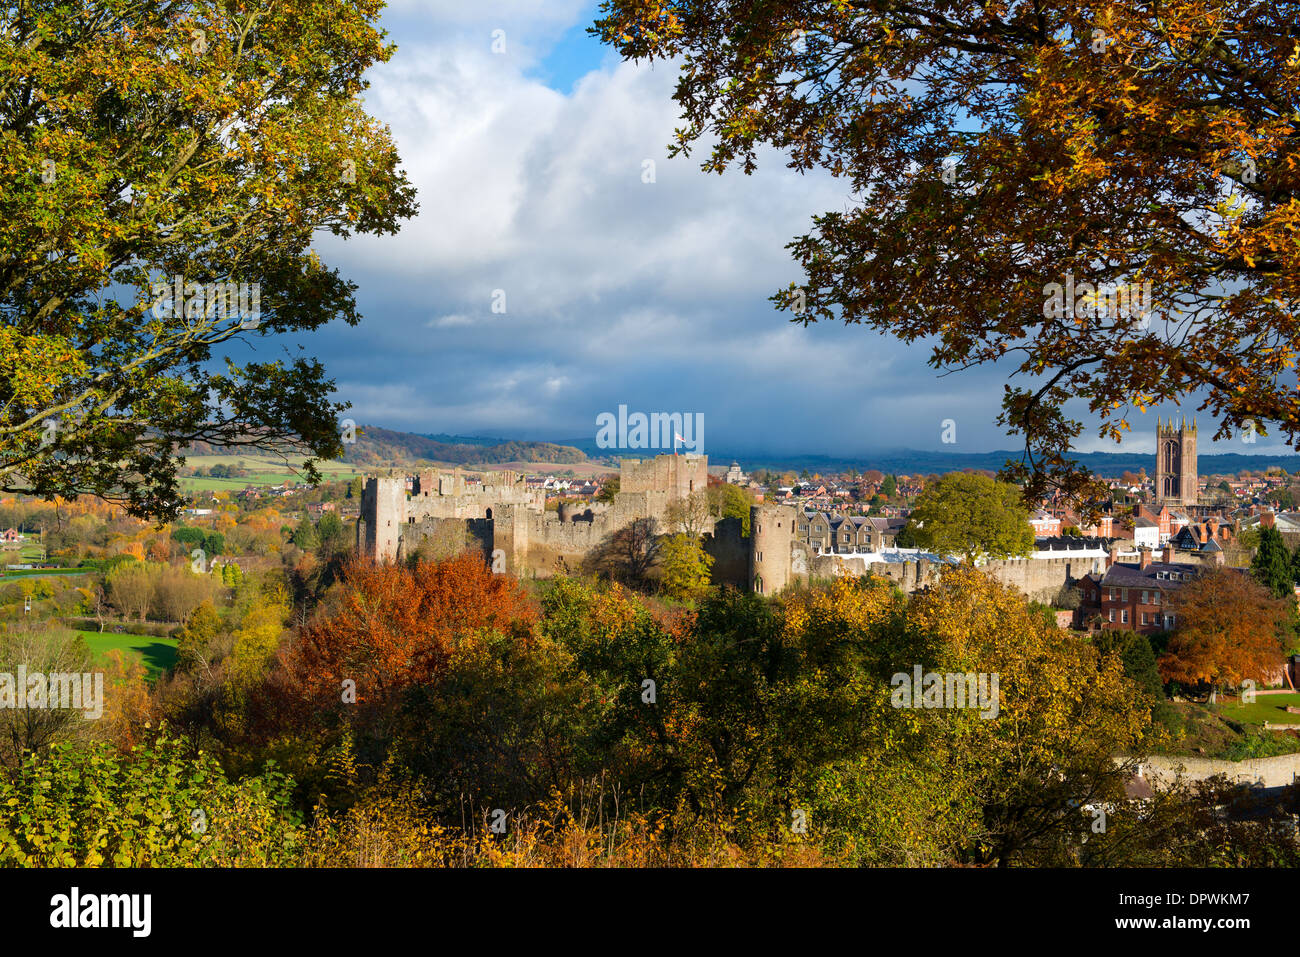 The market town of Ludlow in autumn, as seen from Whitcliffe Common, Shropshire, England. Stock Photo